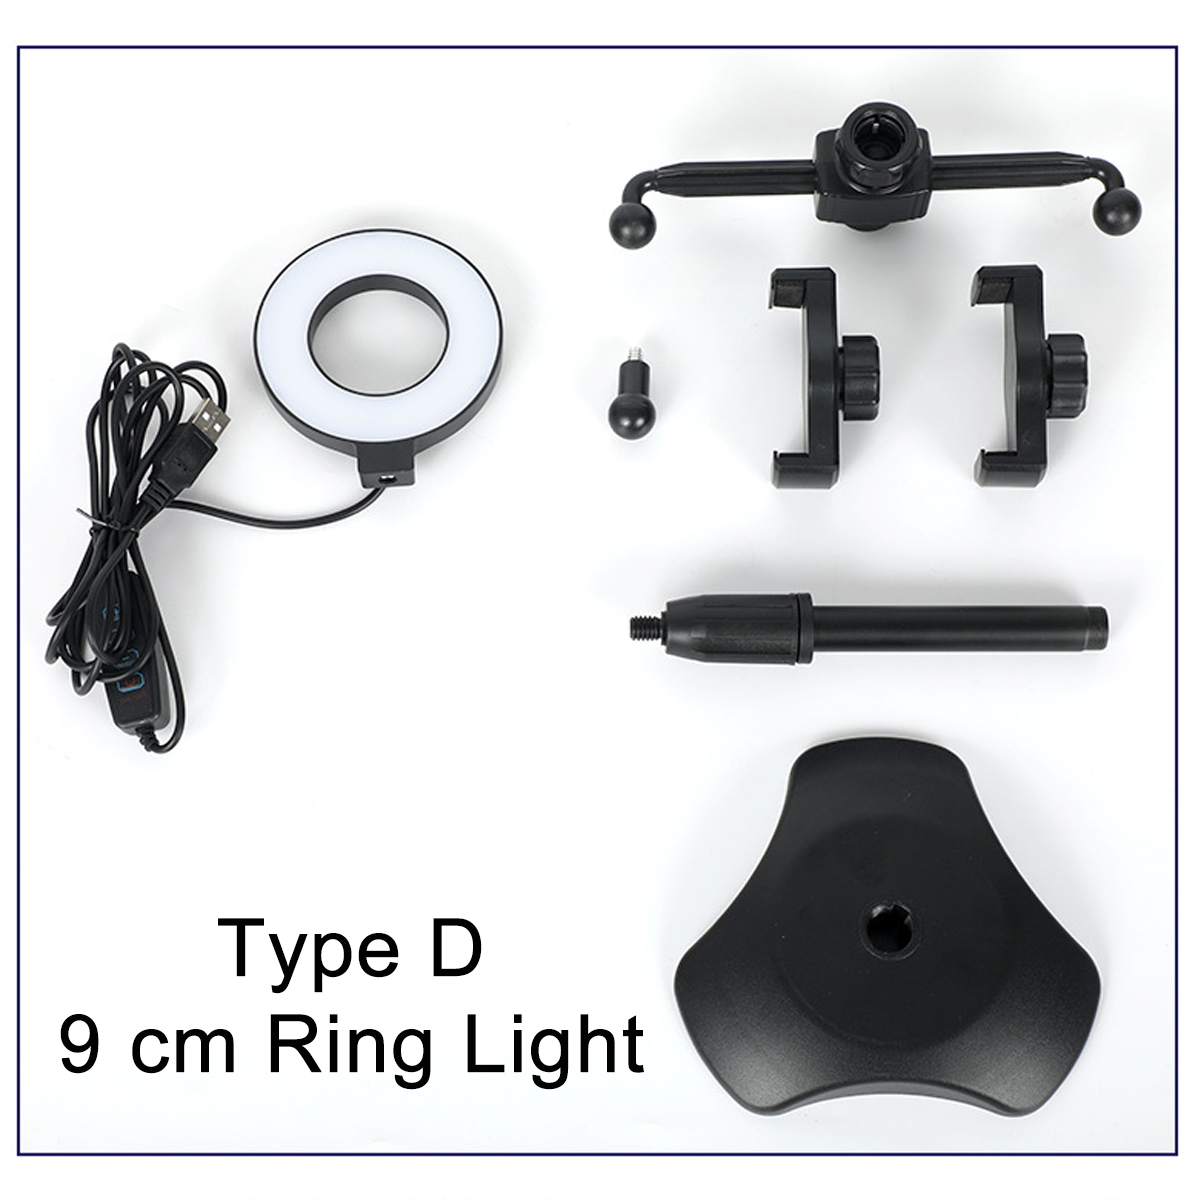 916-cm-3-Modes-of-Color-Temperature-Color-Ring-Fill-Light-with-Dual-Mobile-Phone-Holder-YouTube-Tikt-1881126-15